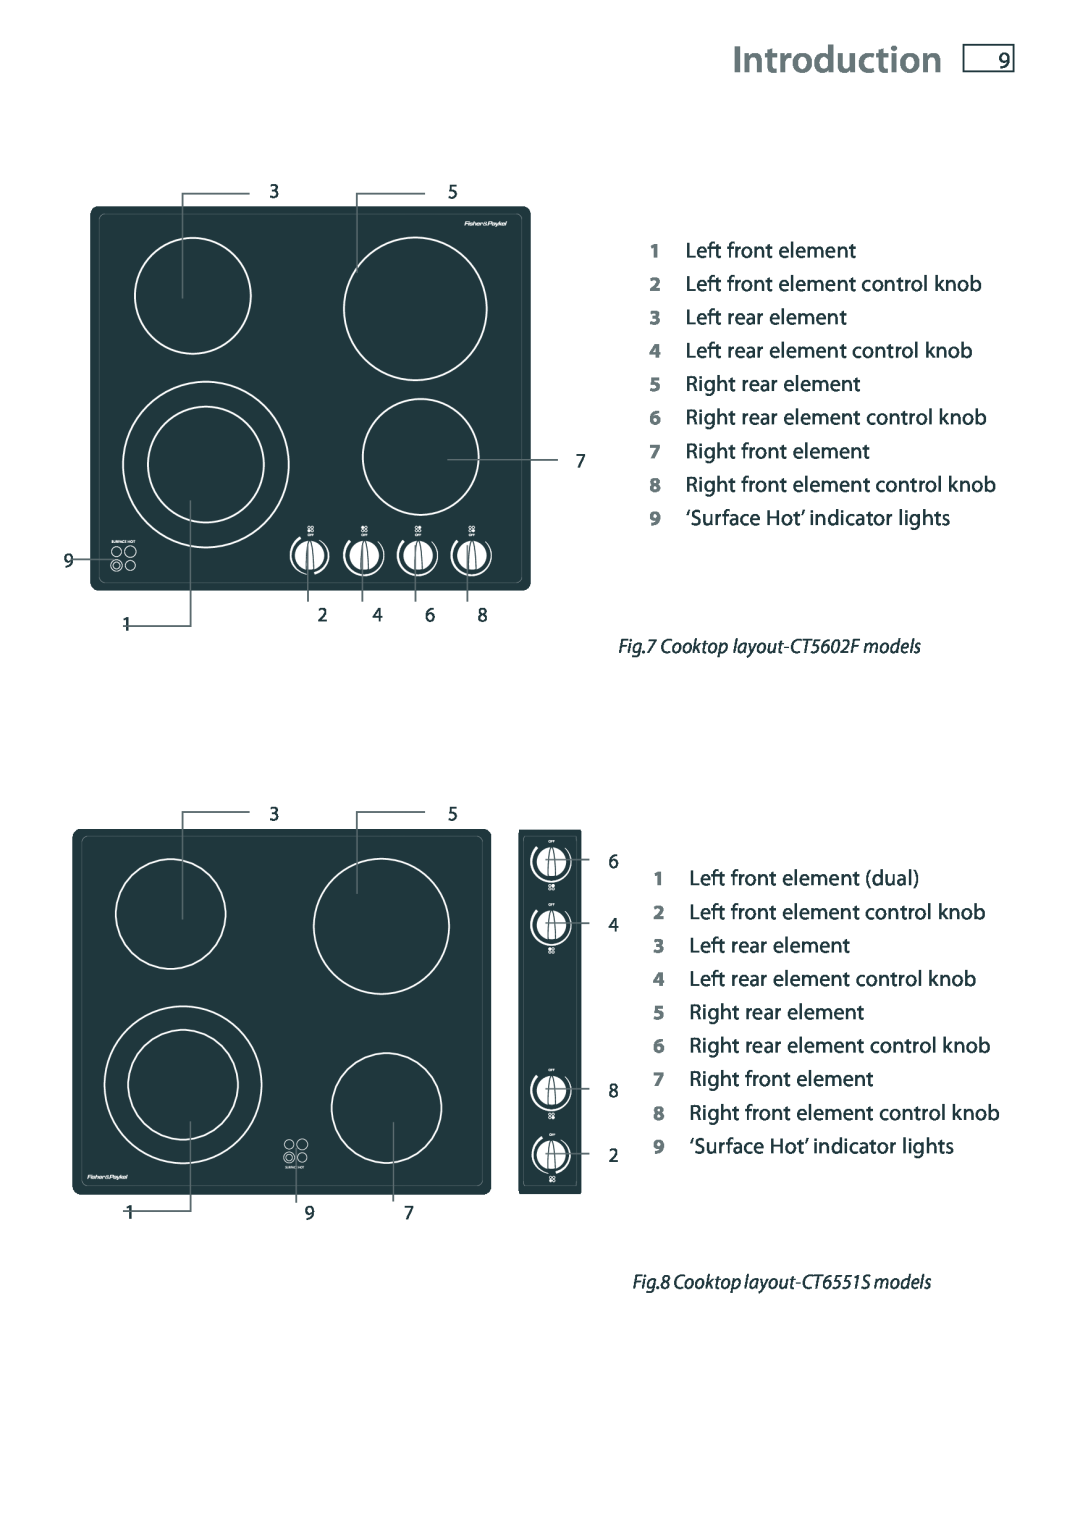 Fisher & Paykel CT2802, CT560C Introduction, Cooktop layout-CT5602F models, Cooktop layout-CT6551S models 